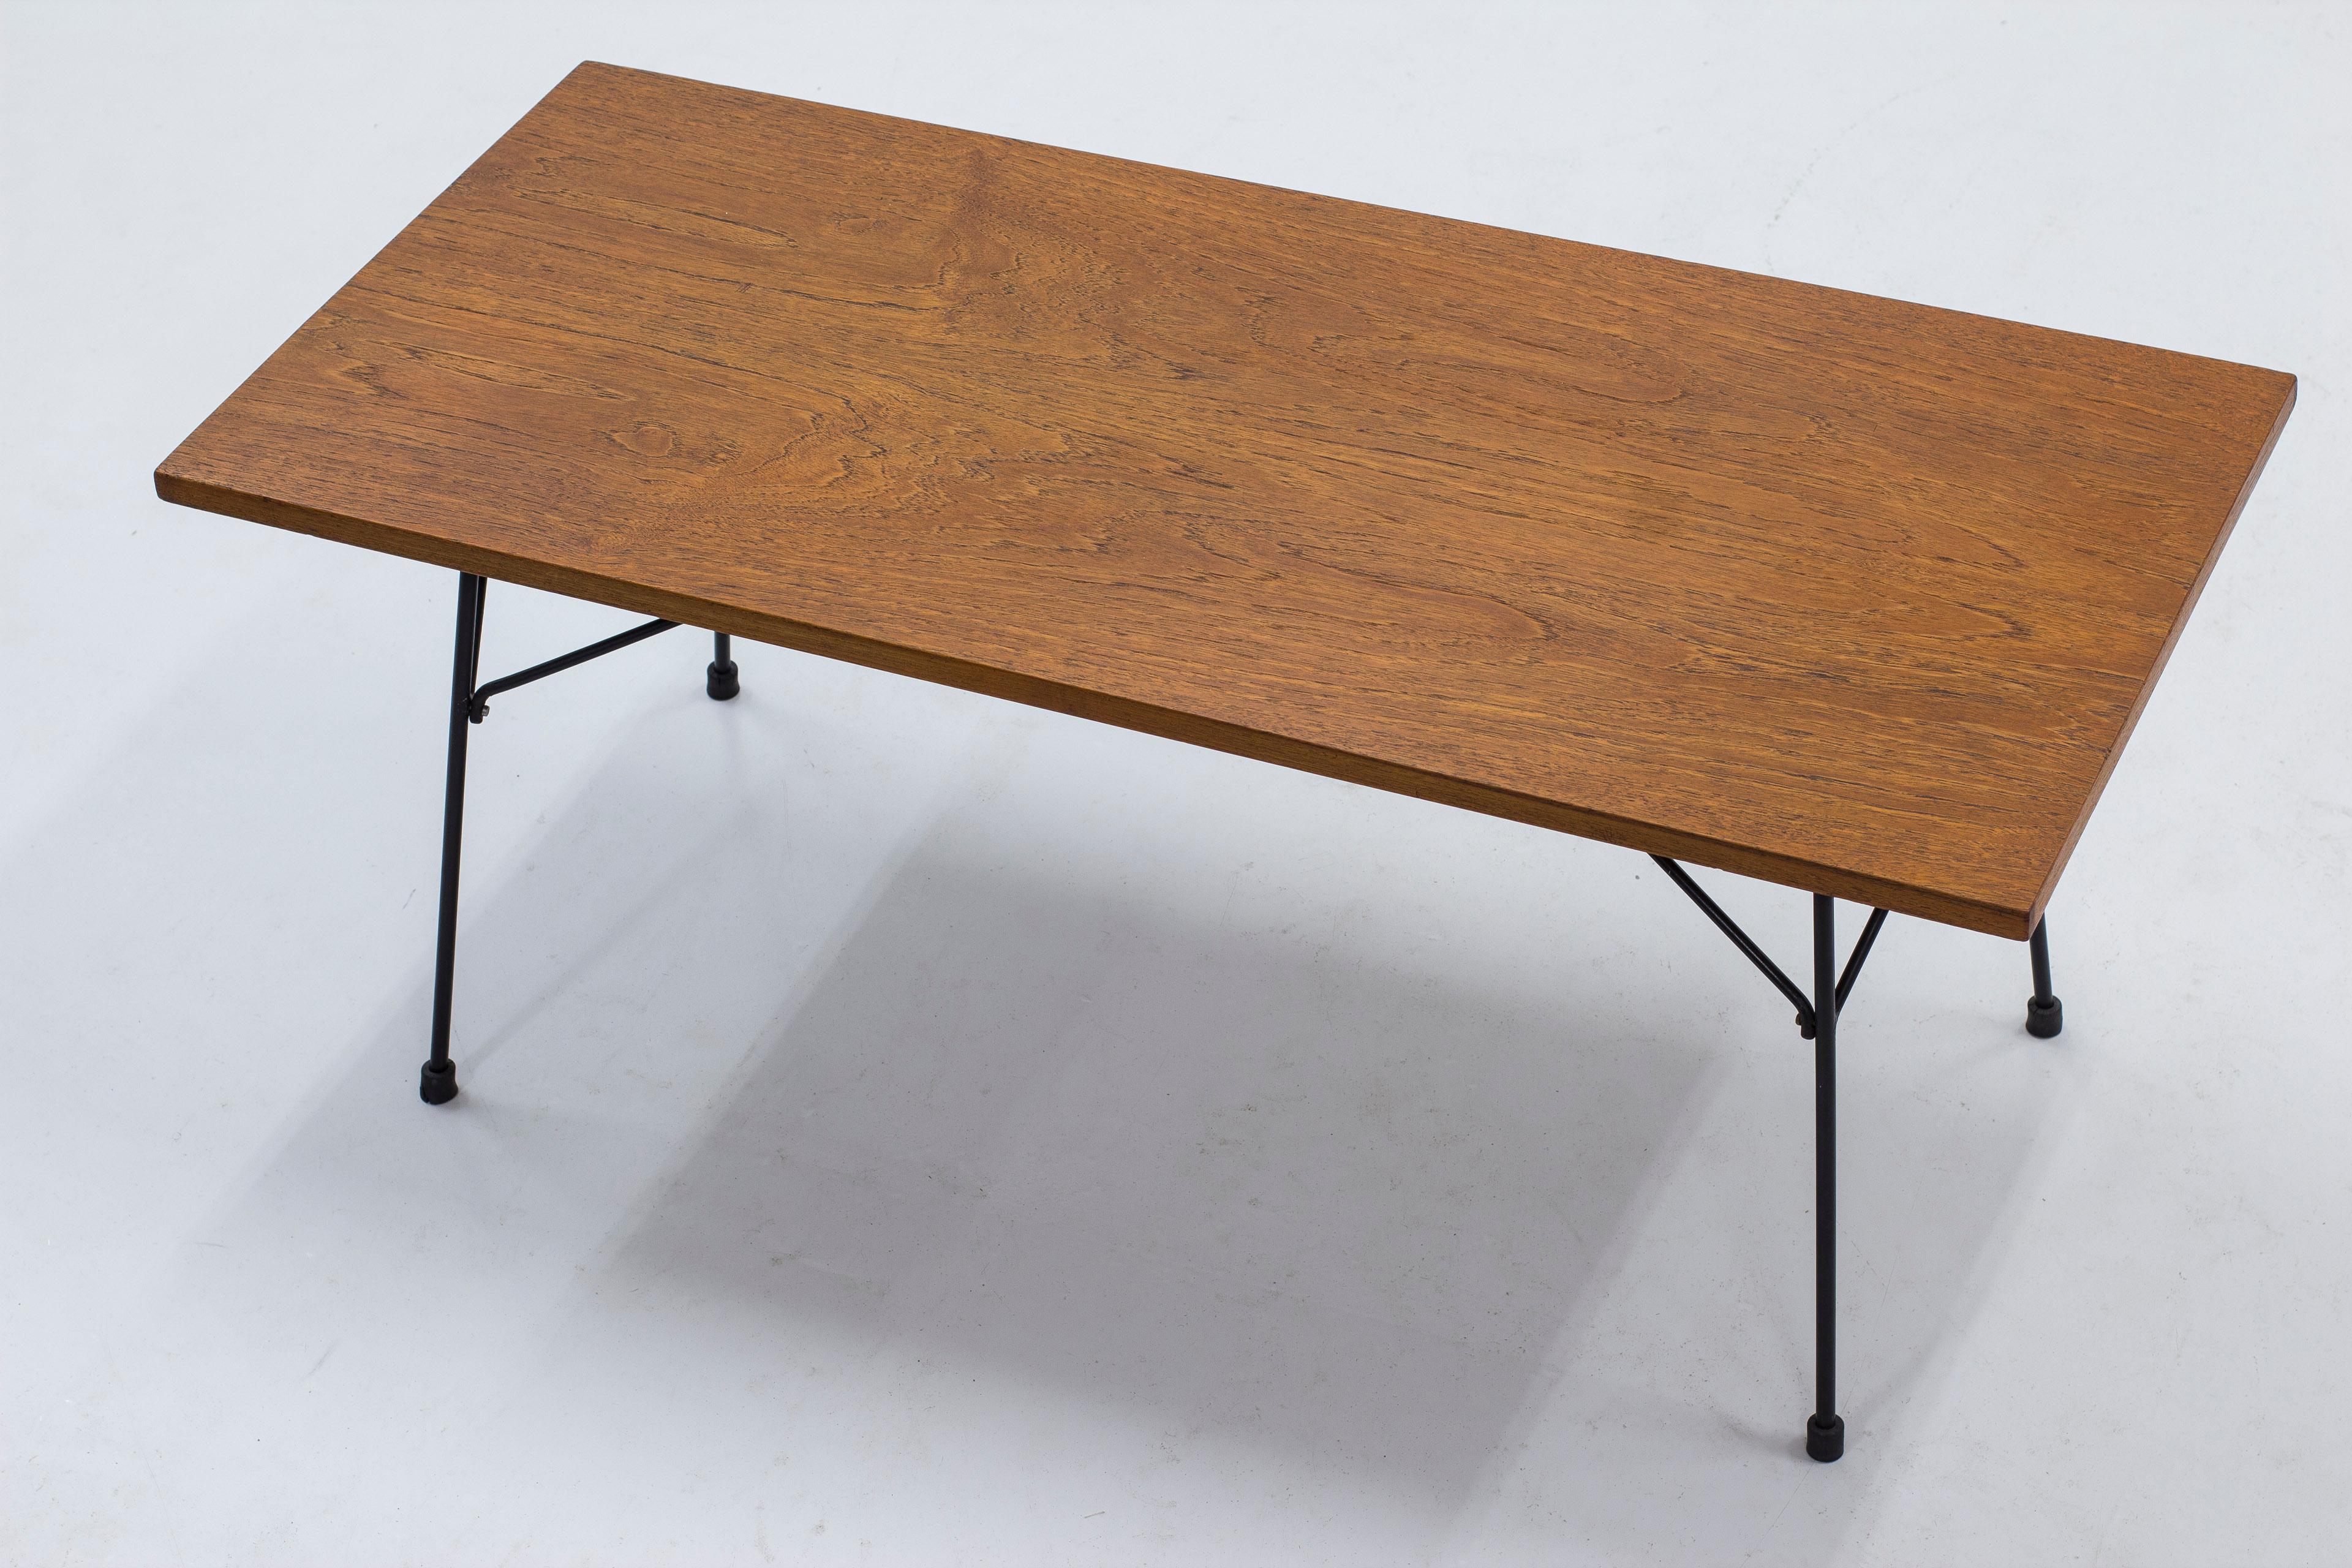 Rare sofa table designed by Hans-Agne Jakobsson. Early production from his own company when they were established in Åhus, Sweden. Done sometime during the 1950s. Black lacquered metal base with a teak table top. Good vintage condition with age